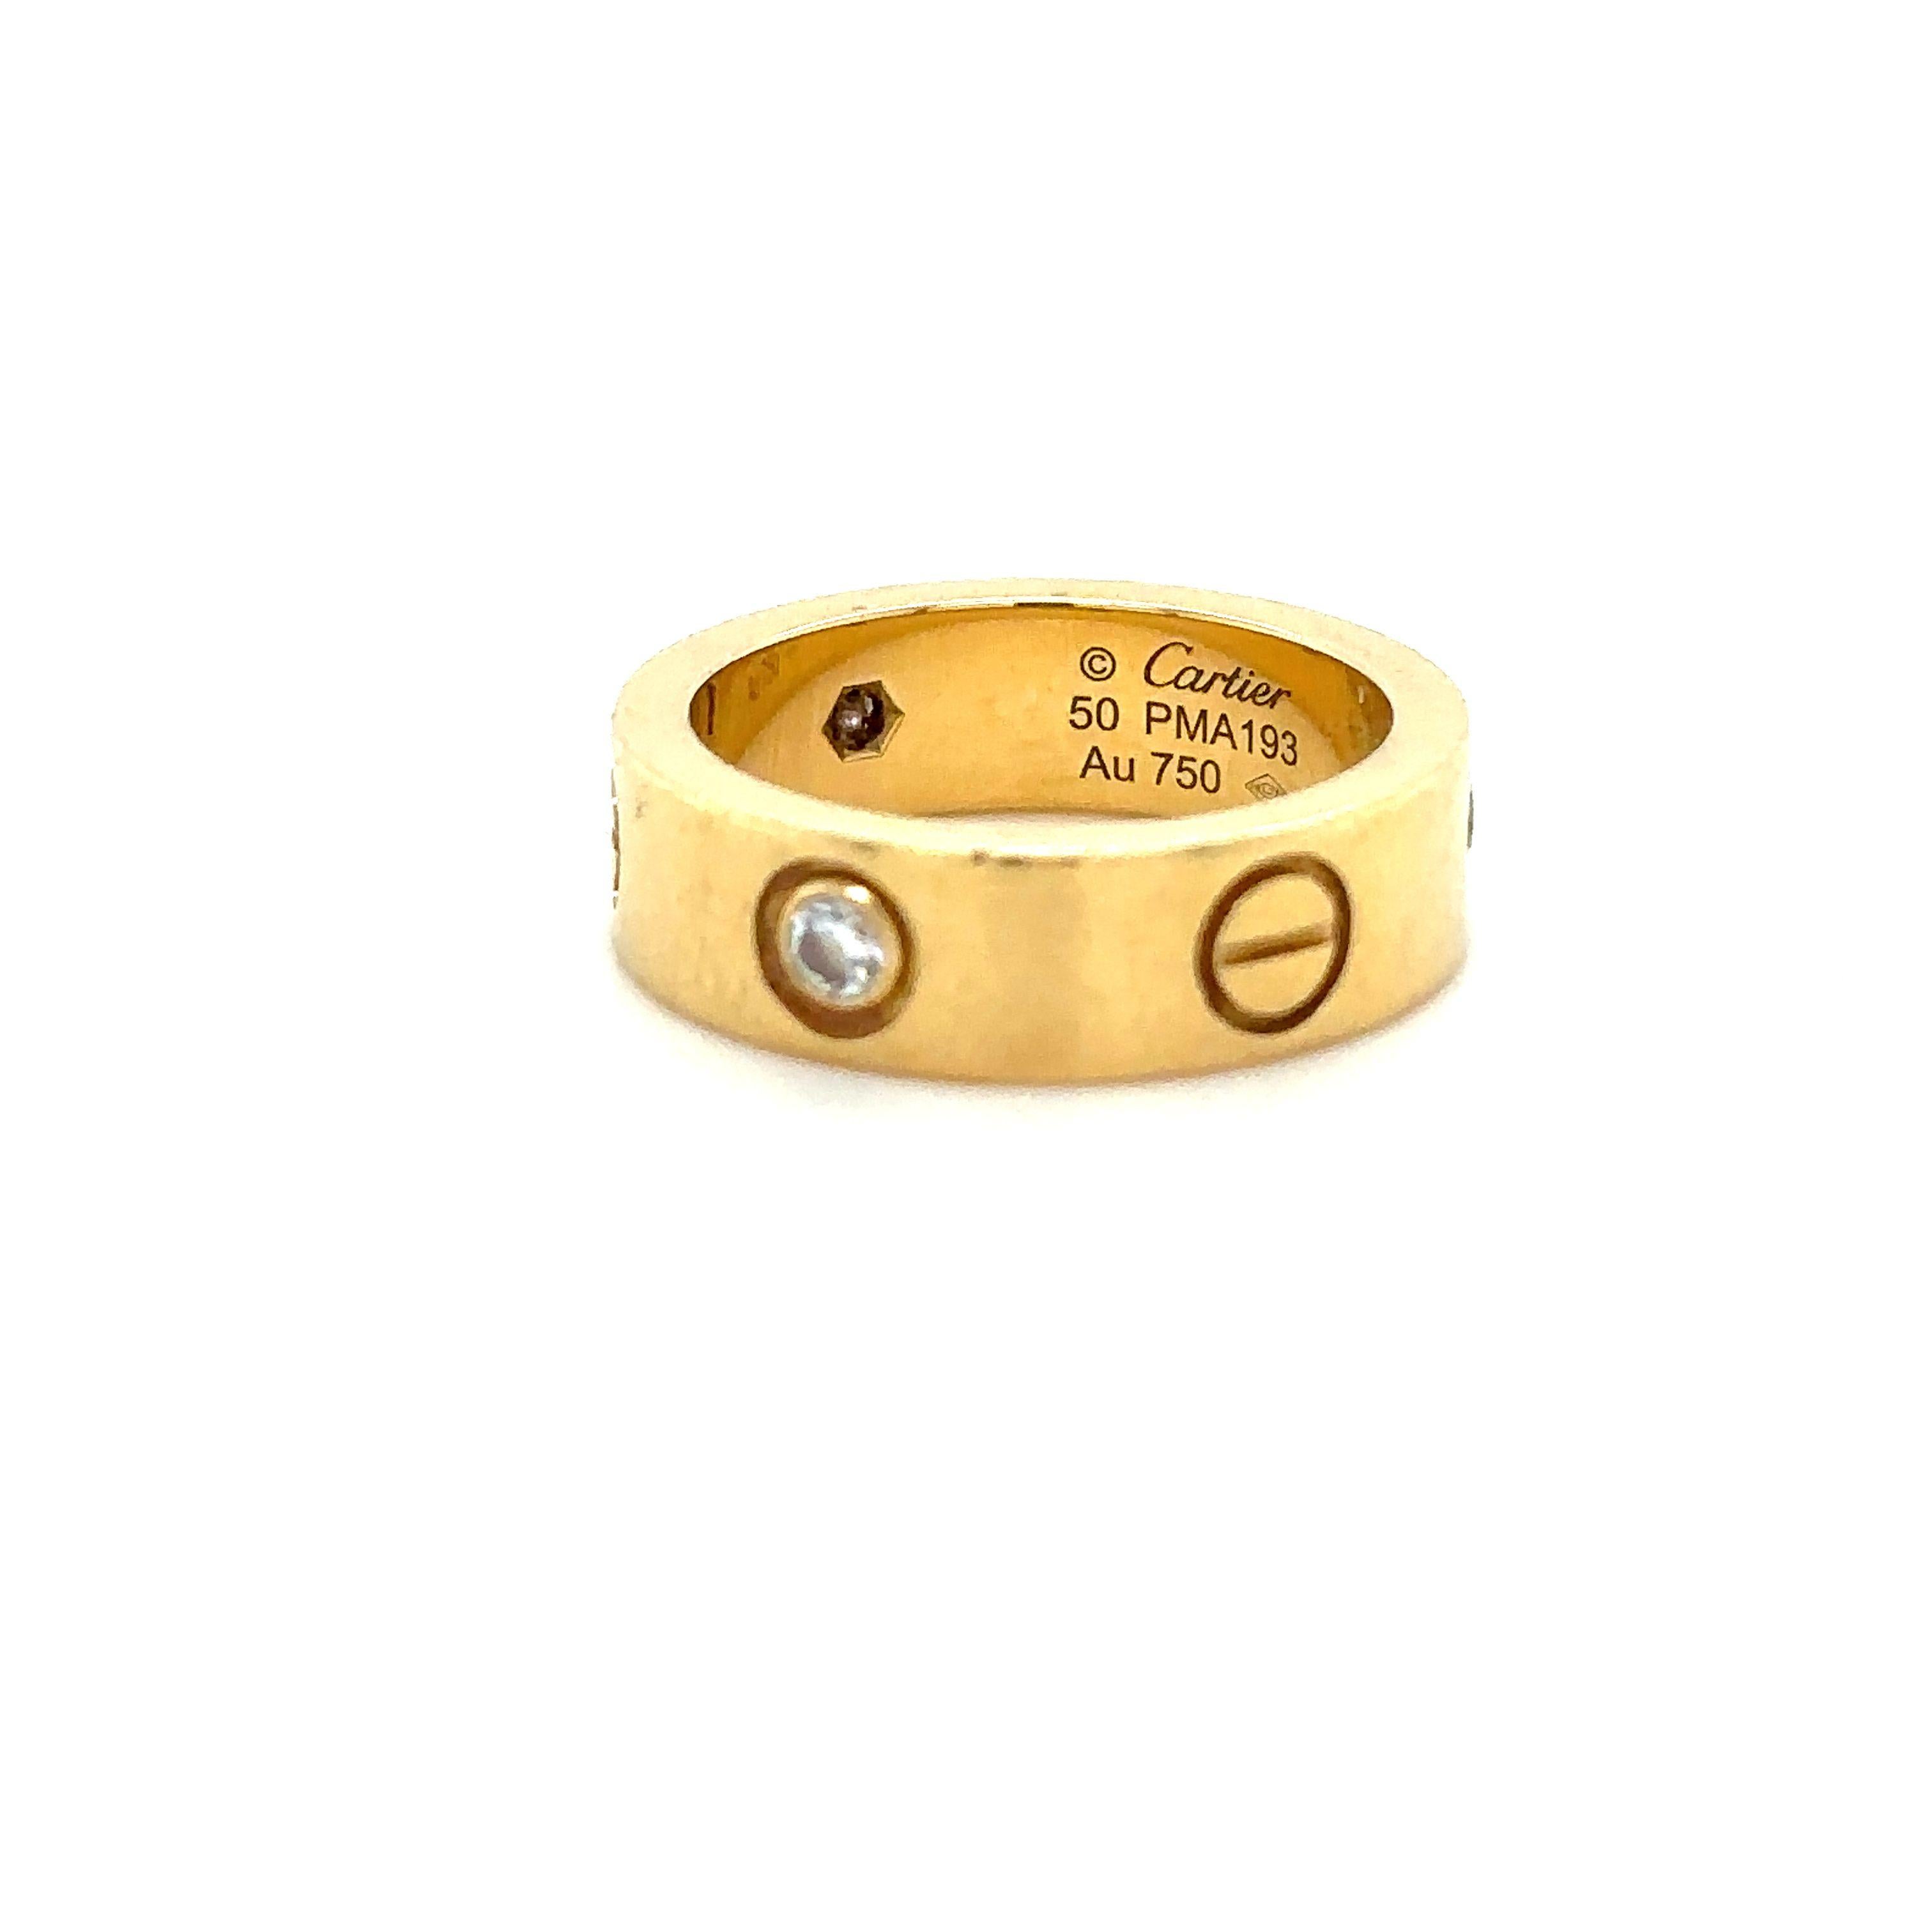 Unique features: 

Love ring, yellow gold 750/1000, set with 3 brilliant-cut diamonds. Width: 5.5mm.

Metal: Yellow Gold 750/1000
Carat: N/A
Colour: N/A
Clarity:  N/A
Cut: N/A
Weight: N/A
Engravings/Markings: Au750

Size/Measurement: 5.5mm width